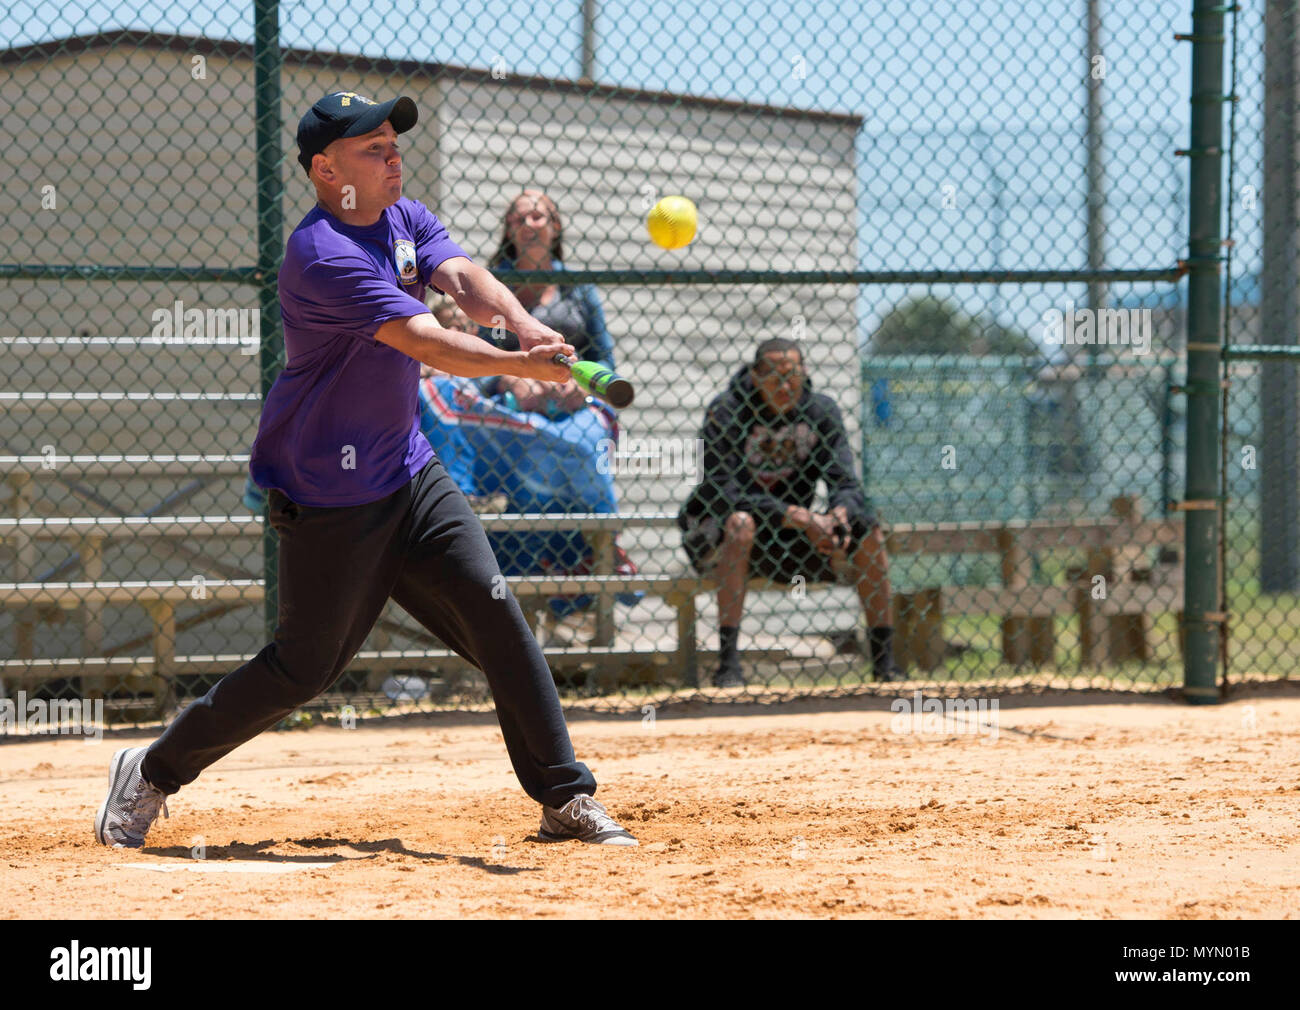 MAYPORT, Fla. (May 5, 2017) – Logistics Specialist 2nd Class Kevin Ortega swings at a pitch during a softball game between the amphibious assault ship USS Iwo Jima’s (LHD 7) Wardroom and Second Class Petty Officer Association (SCPOA).  The game was held as part of a tournament between the ship’s Wardroom, First Class Petty Officer Association, Chief Petty Officer Association & SCPOA to build camaraderie and morale among the ship’s crew. Stock Photo